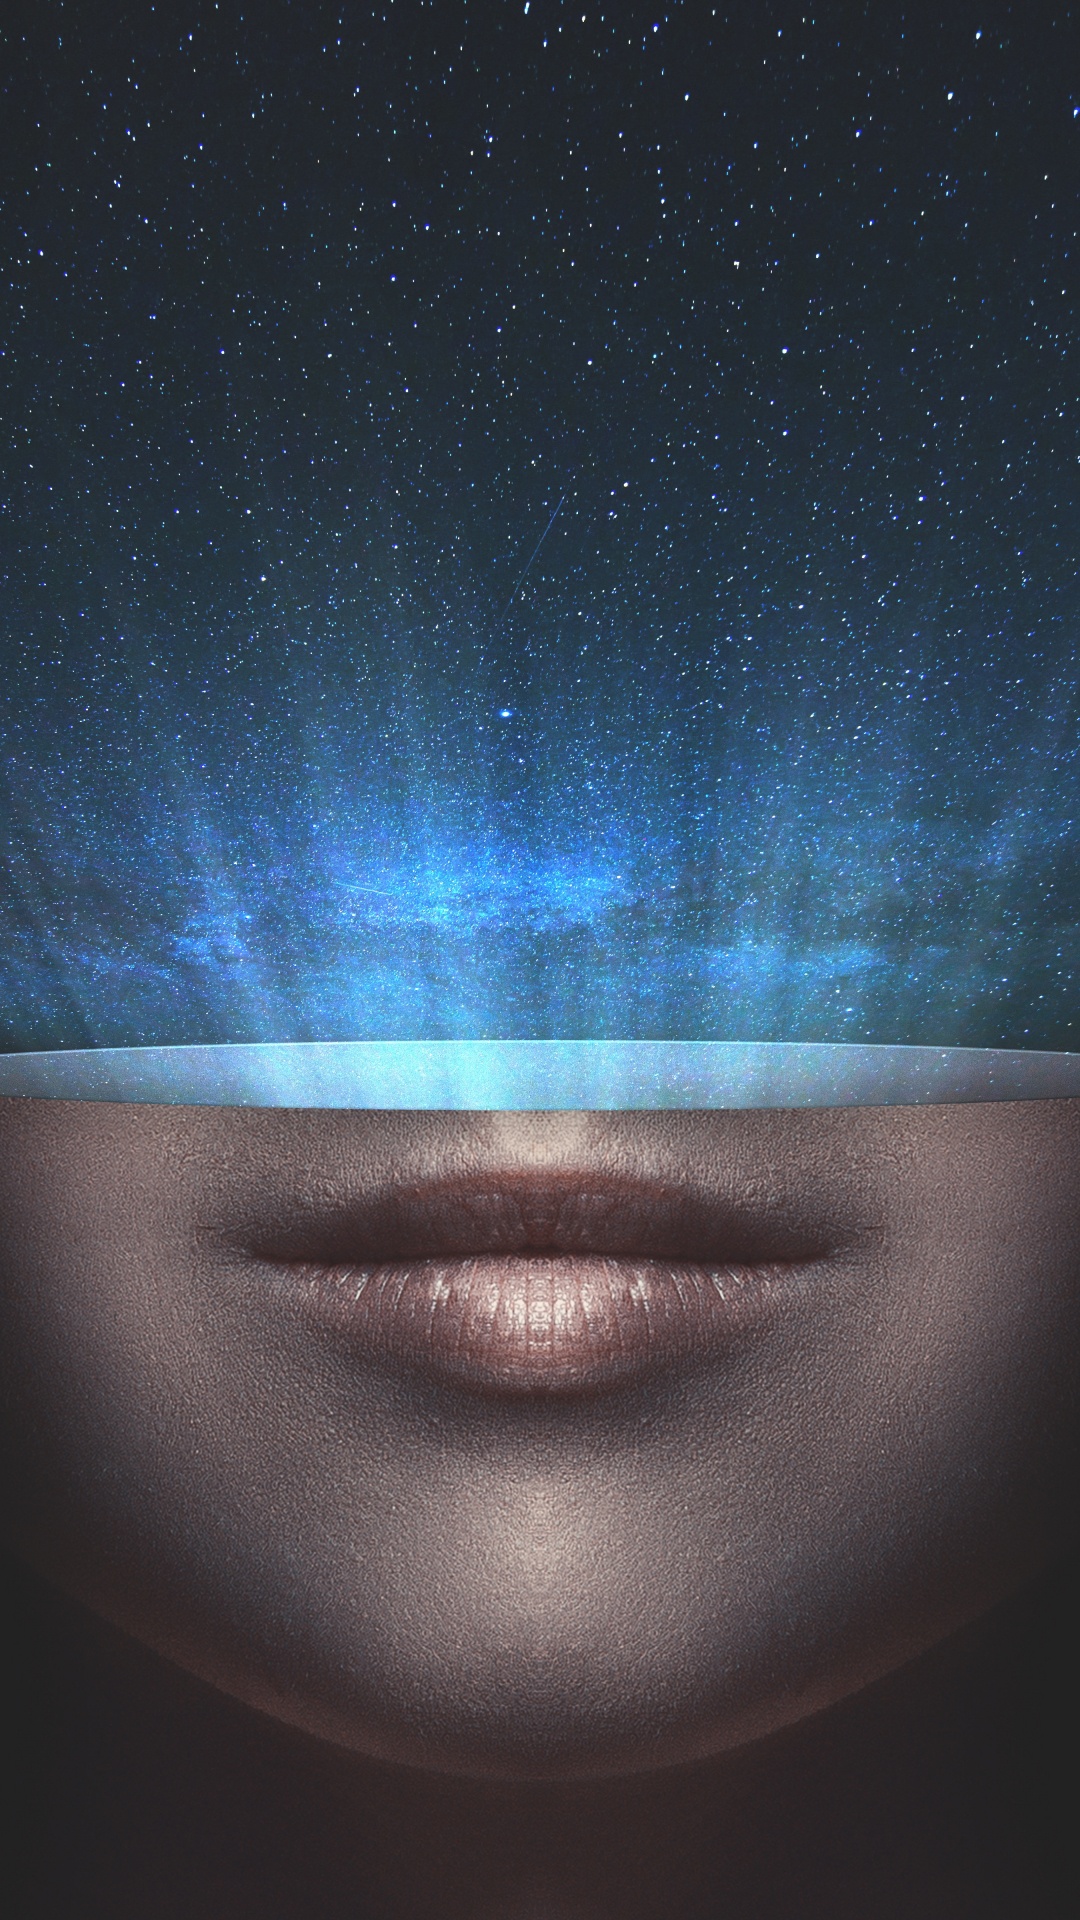 Persons Face With Blue and White Stars. Wallpaper in 1080x1920 Resolution